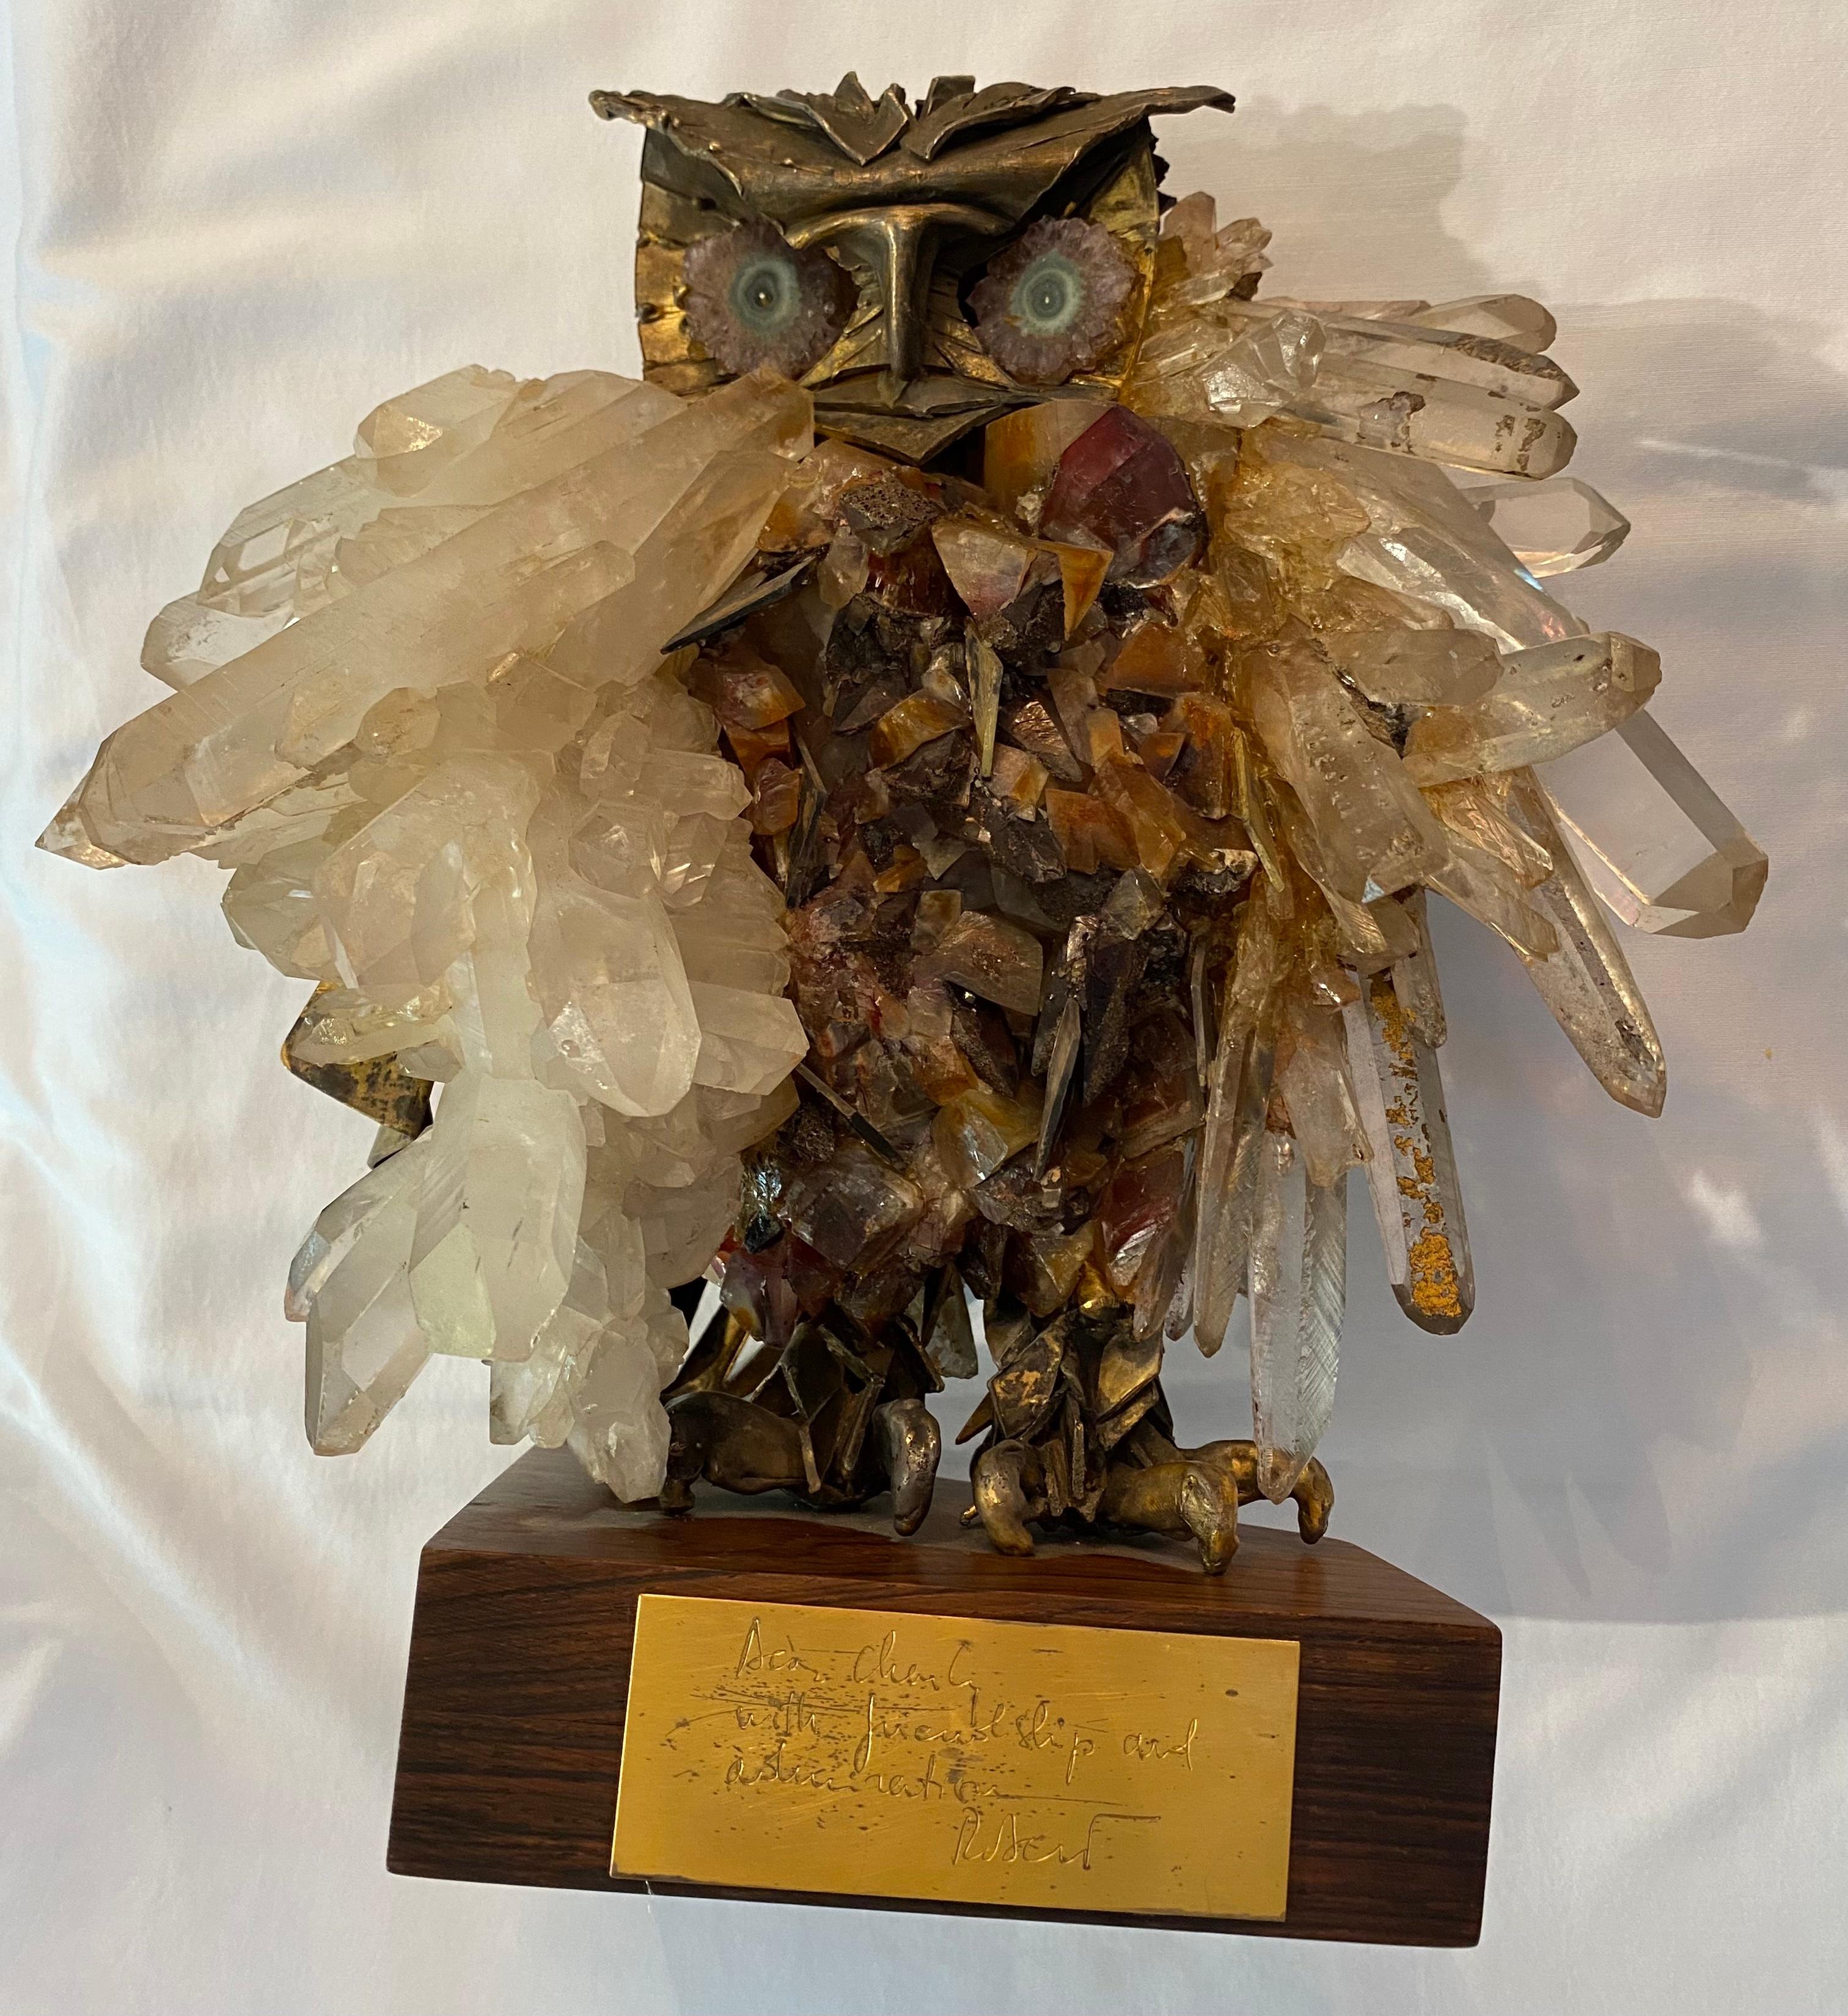 A brass, crystal, and geode Brutalist style sculpture of an owl on a wood base. Most likely done by Artist Claude Barbat. Highly detailed and intricate. The body is formed from hand cut brass and iron stained quartz. The wings are clusters of quartz